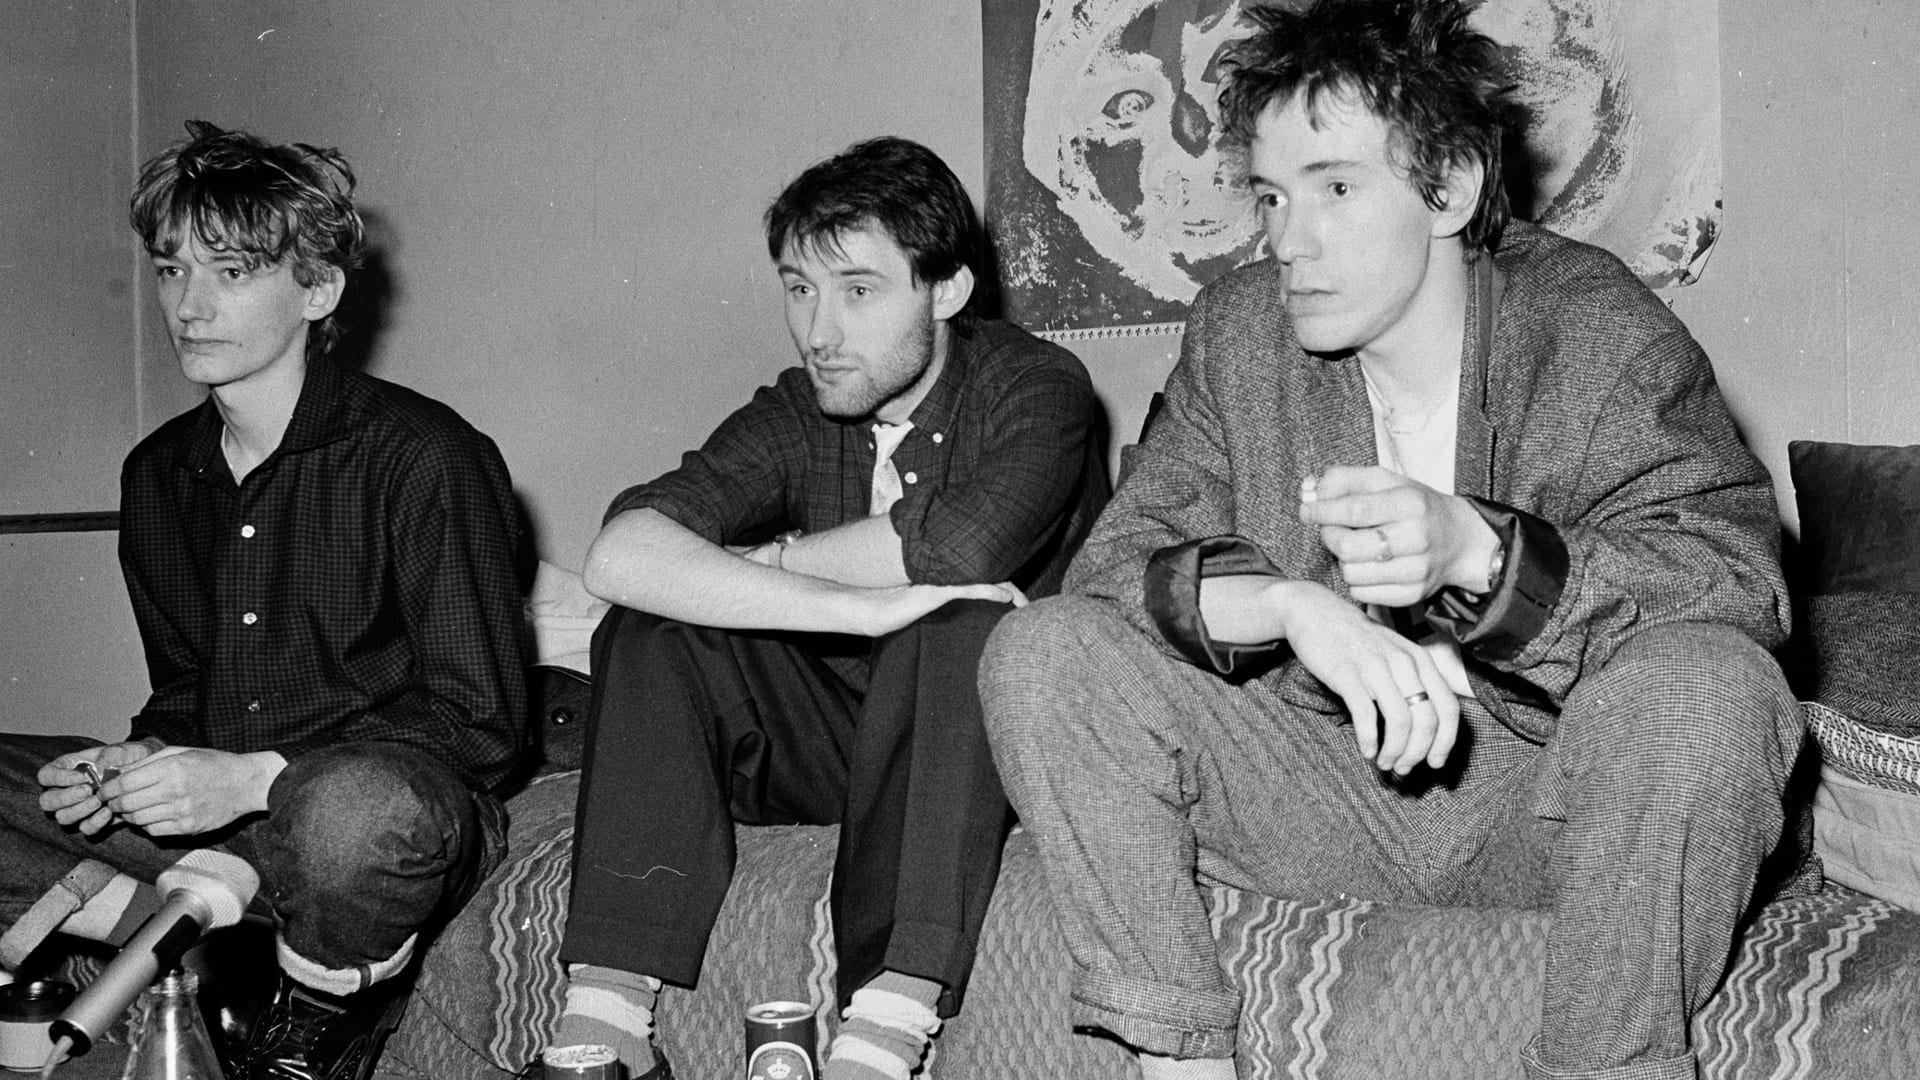 38 Years Ago: PUBLIC IMAGE LTD recorded their only Peel session